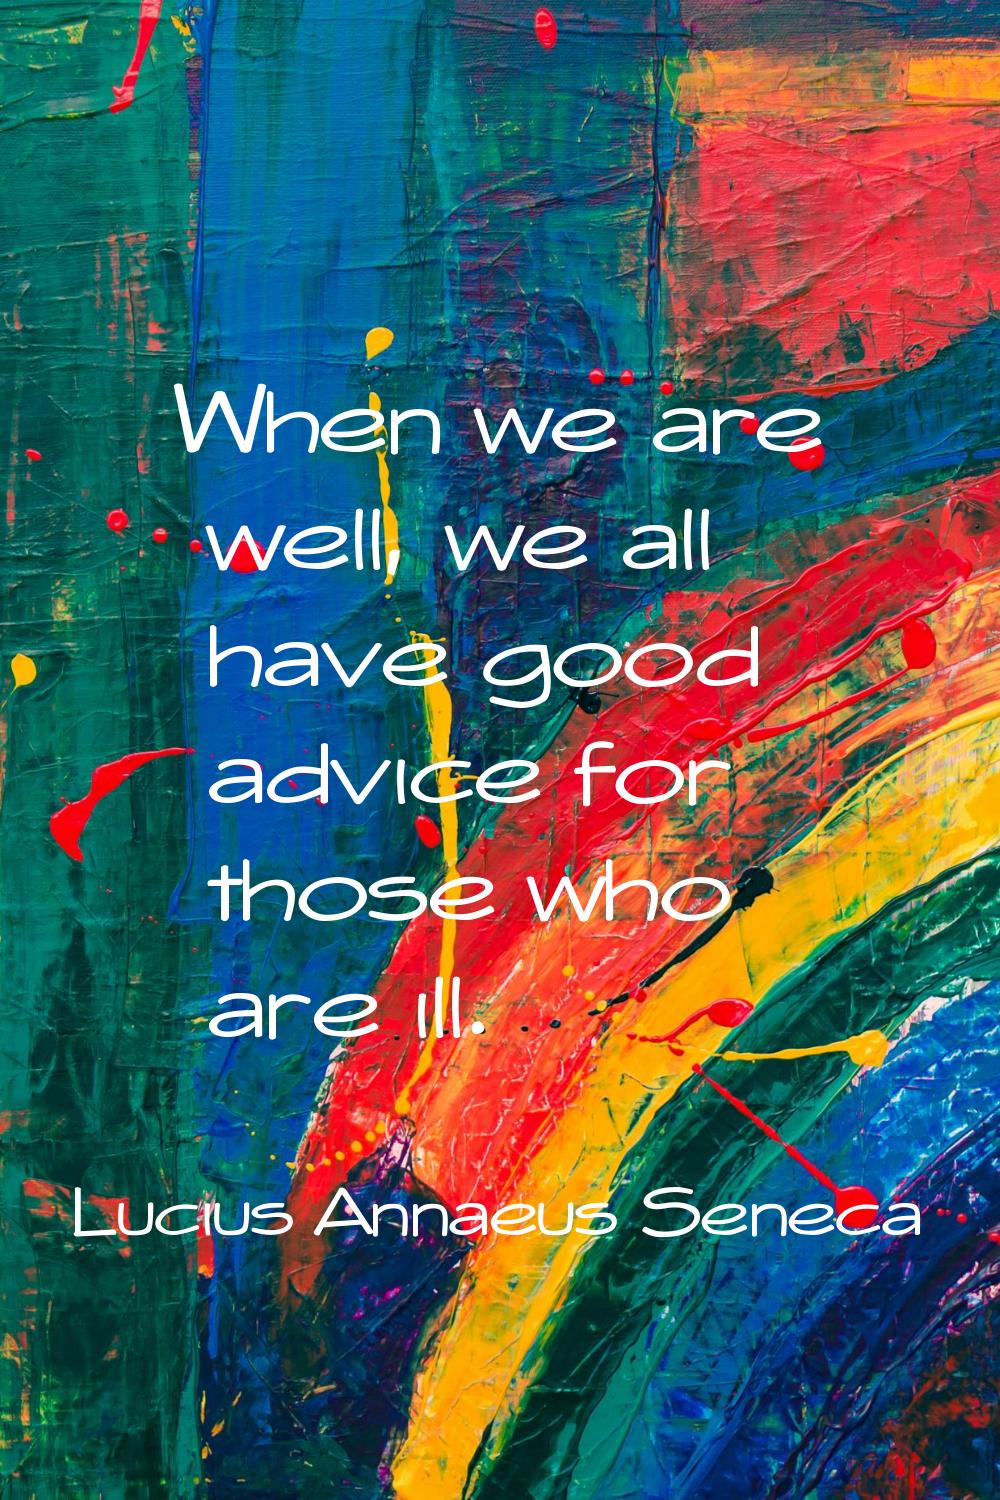 When we are well, we all have good advice for those who are ill.